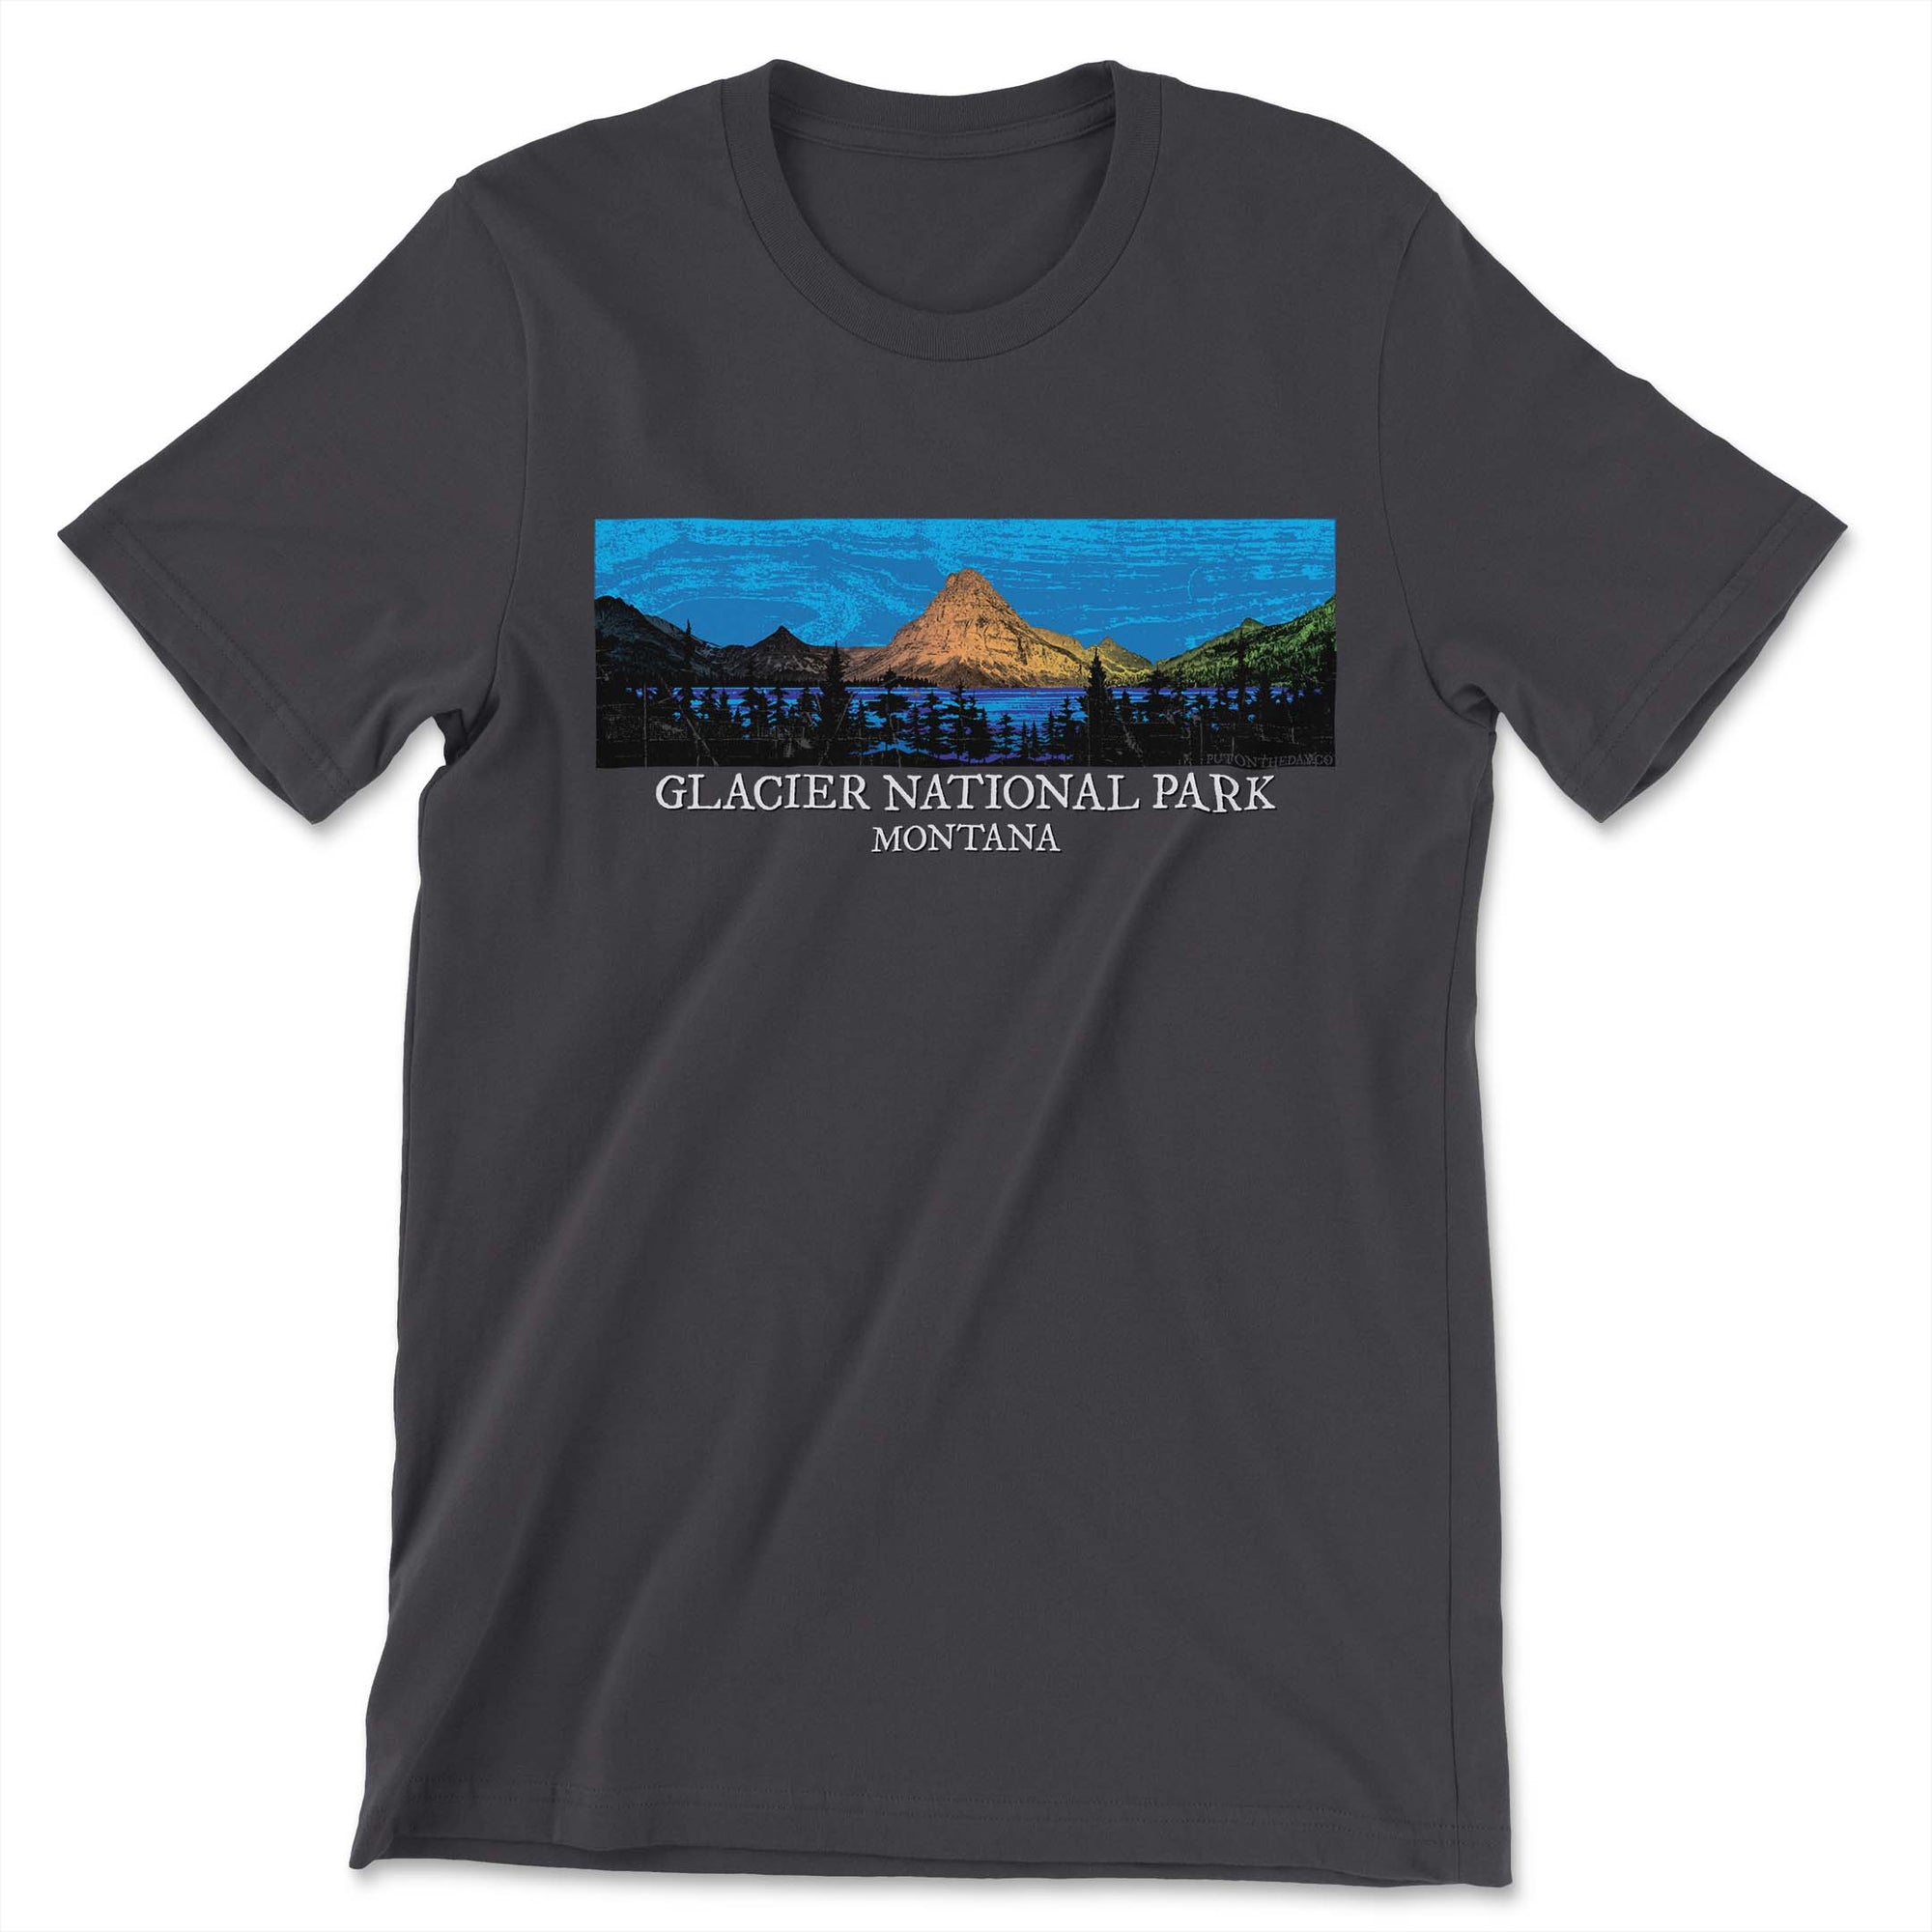 Glacier National Park Montana T-Shirt with Mountain Lake in the Background